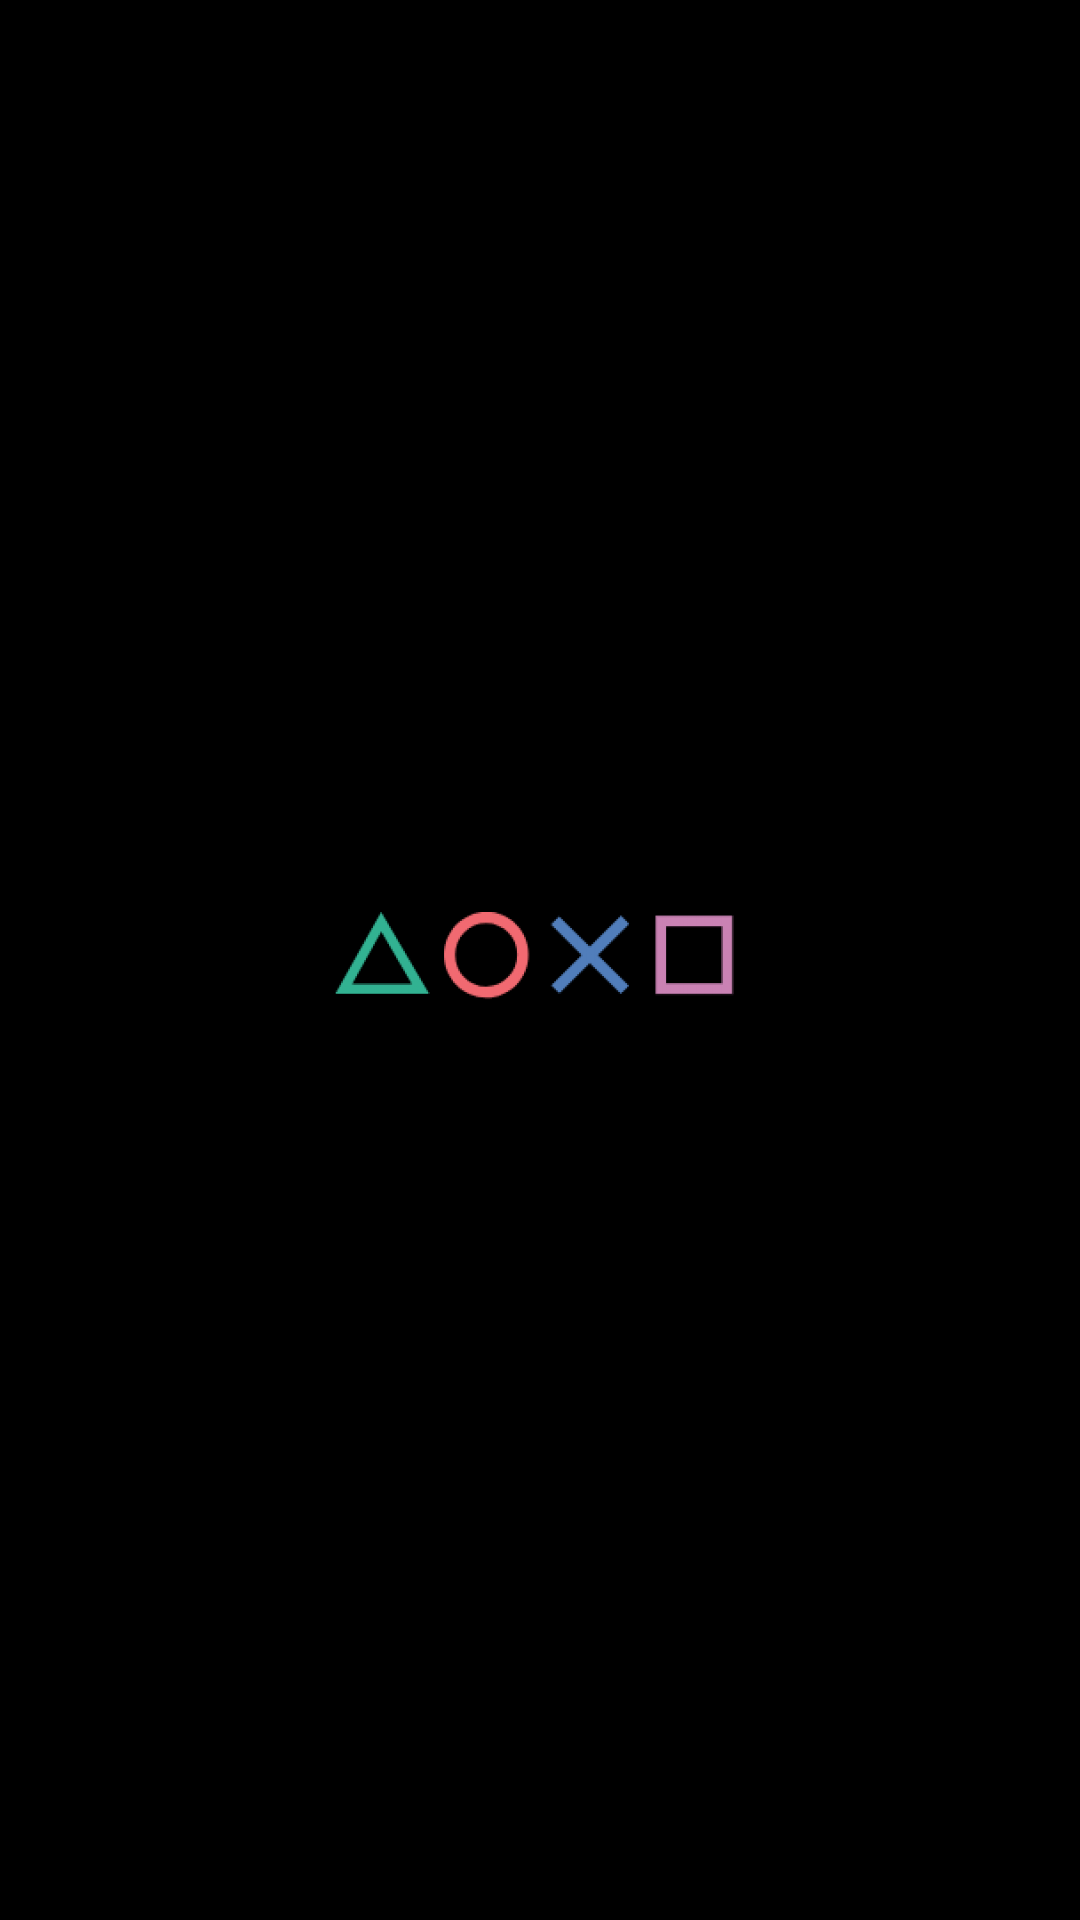 Playstation Buttons Wallpapers Top Free Playstation Buttons Backgrounds Wallpaperaccess